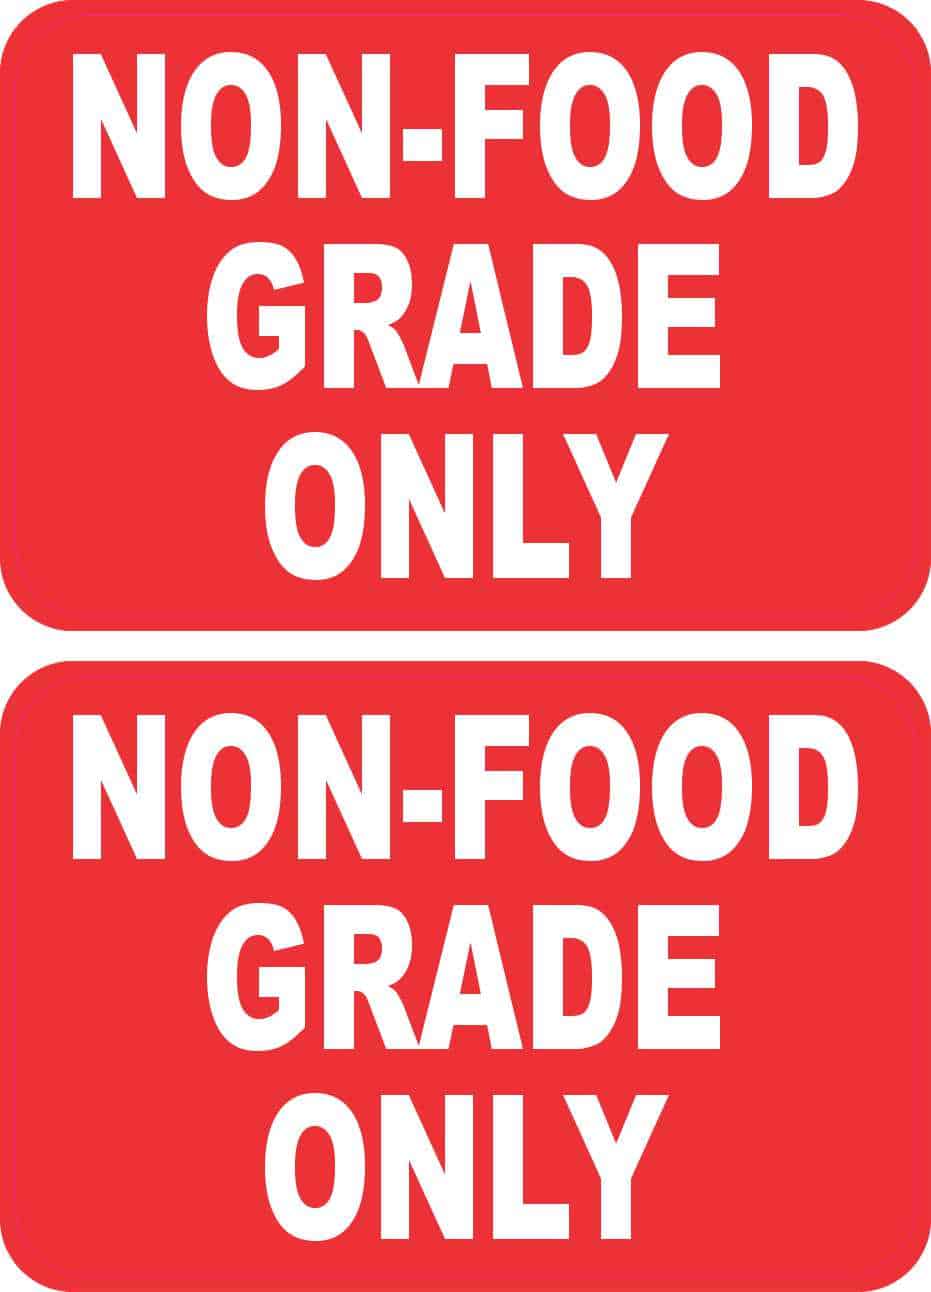 Stickertalk Red Non Food Grade Only Vinyl Stickers 1 Sheet Of 2 Stickers 3 Inches X 2 Inches Each 